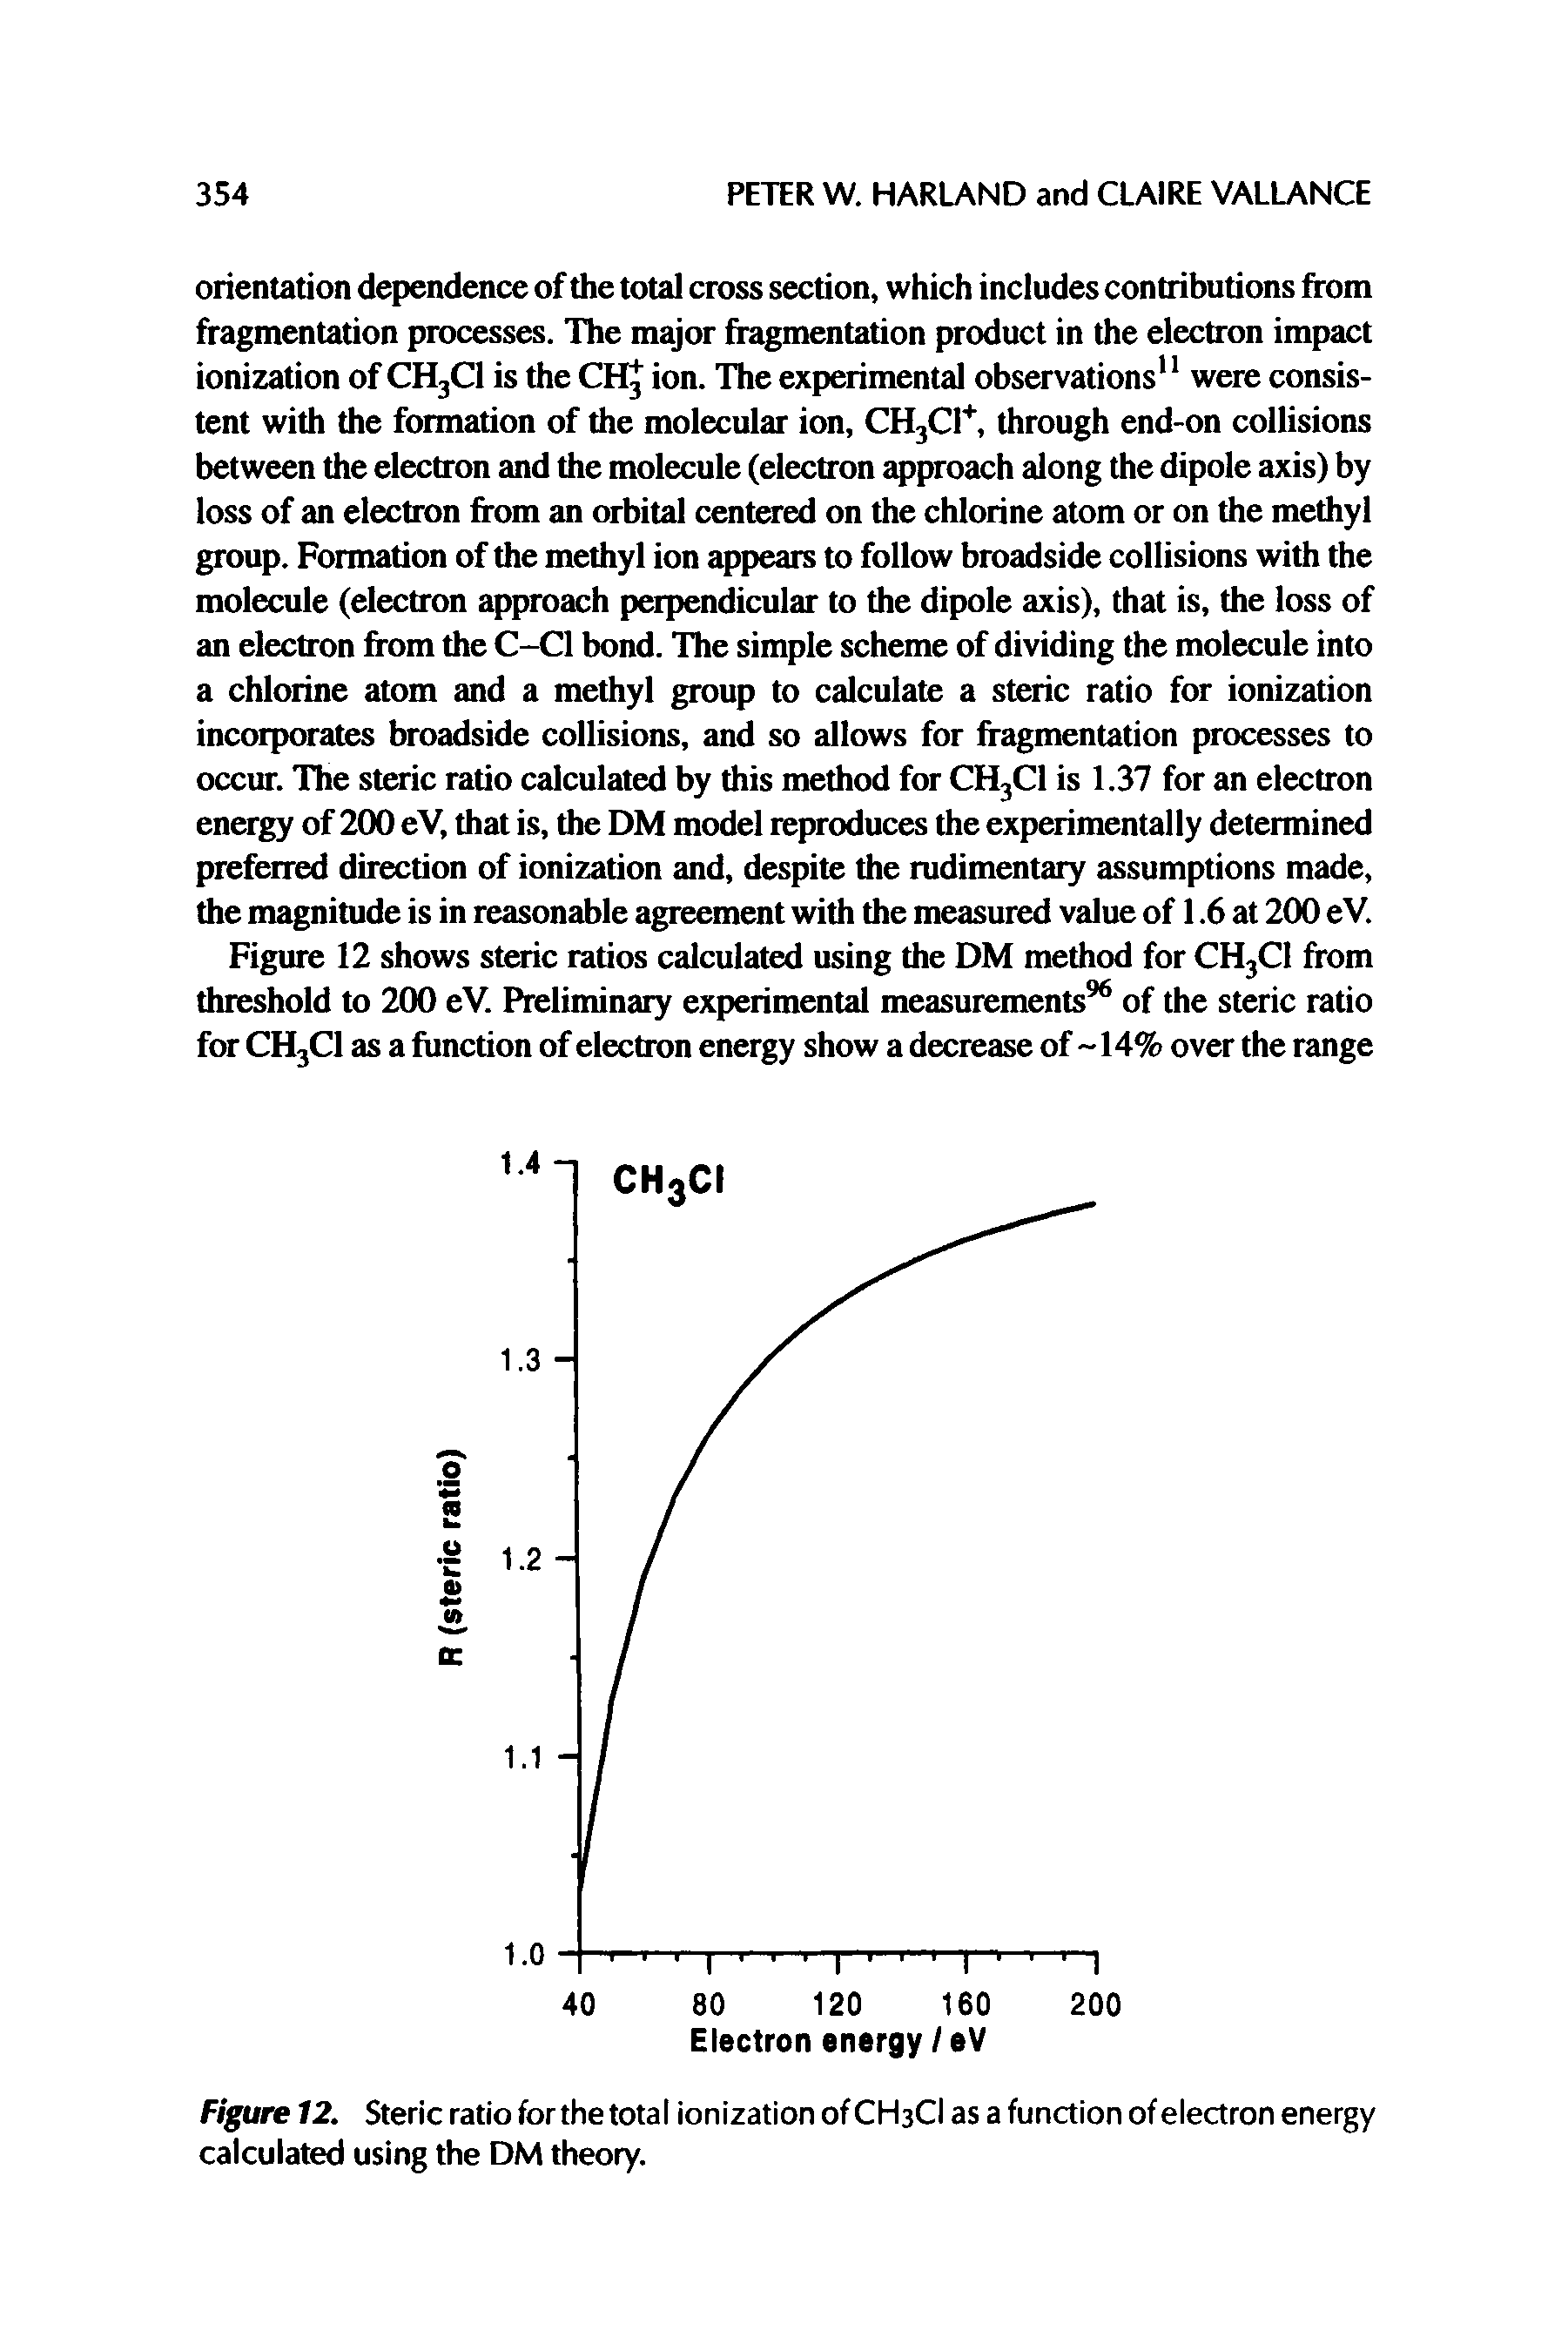 Figure 12. Steric ratio for the total ionization ofCHsCI as a function of electron energy calculated using the DM theory.